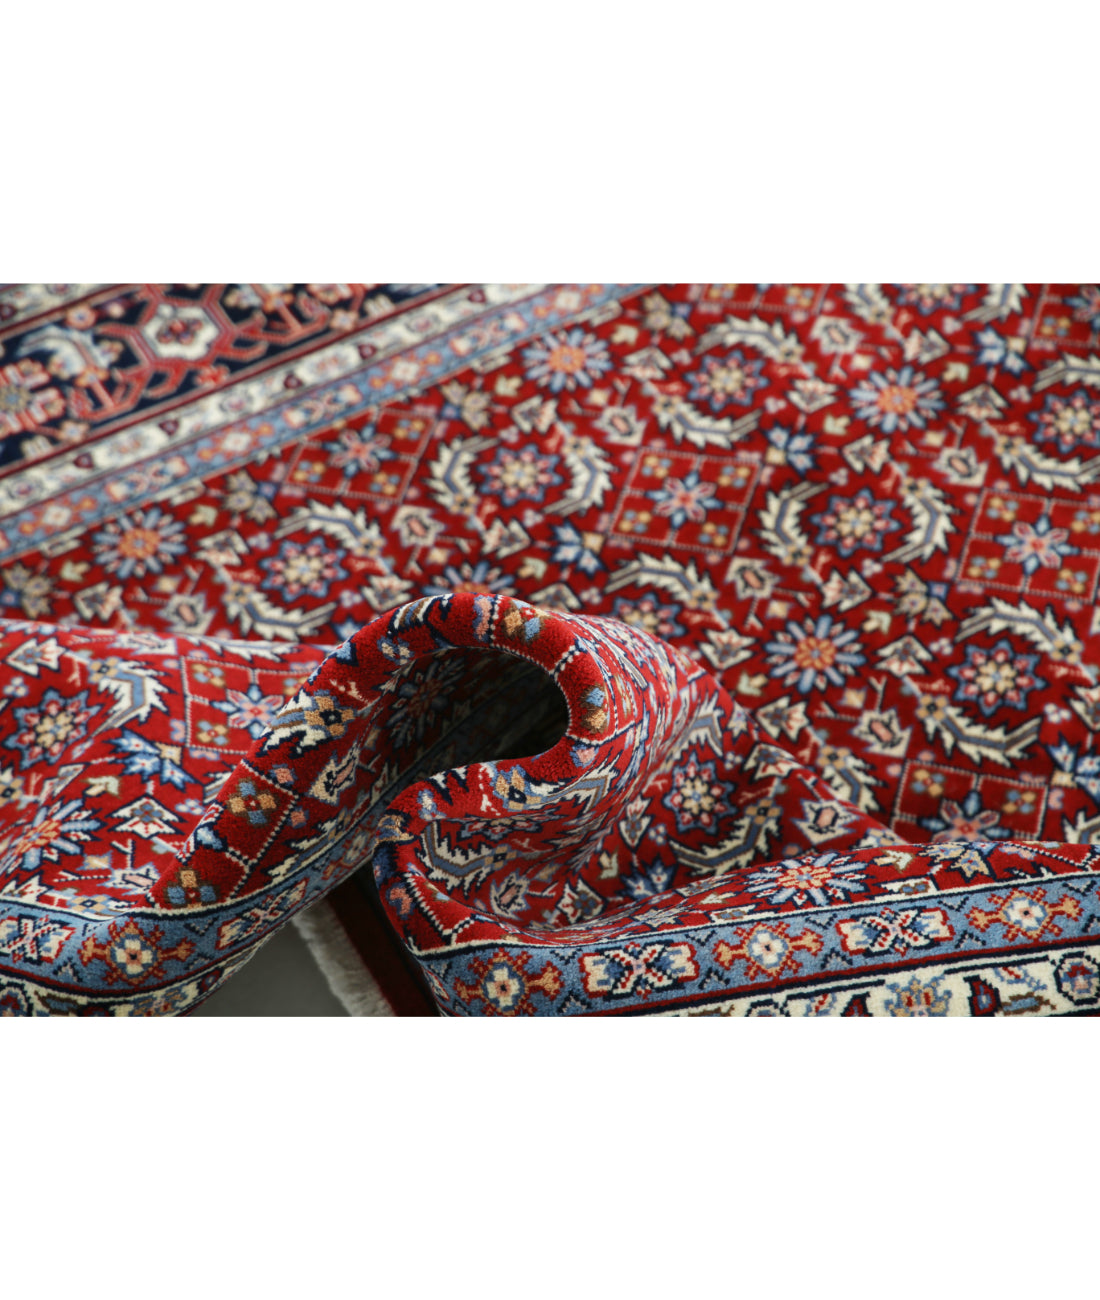 Hand Knotted Heritage Fine Persian Style Wool Rug - 4'11'' x 7'11'' 4' 11" X 7' 11" (150 X 241) / Red / Blue